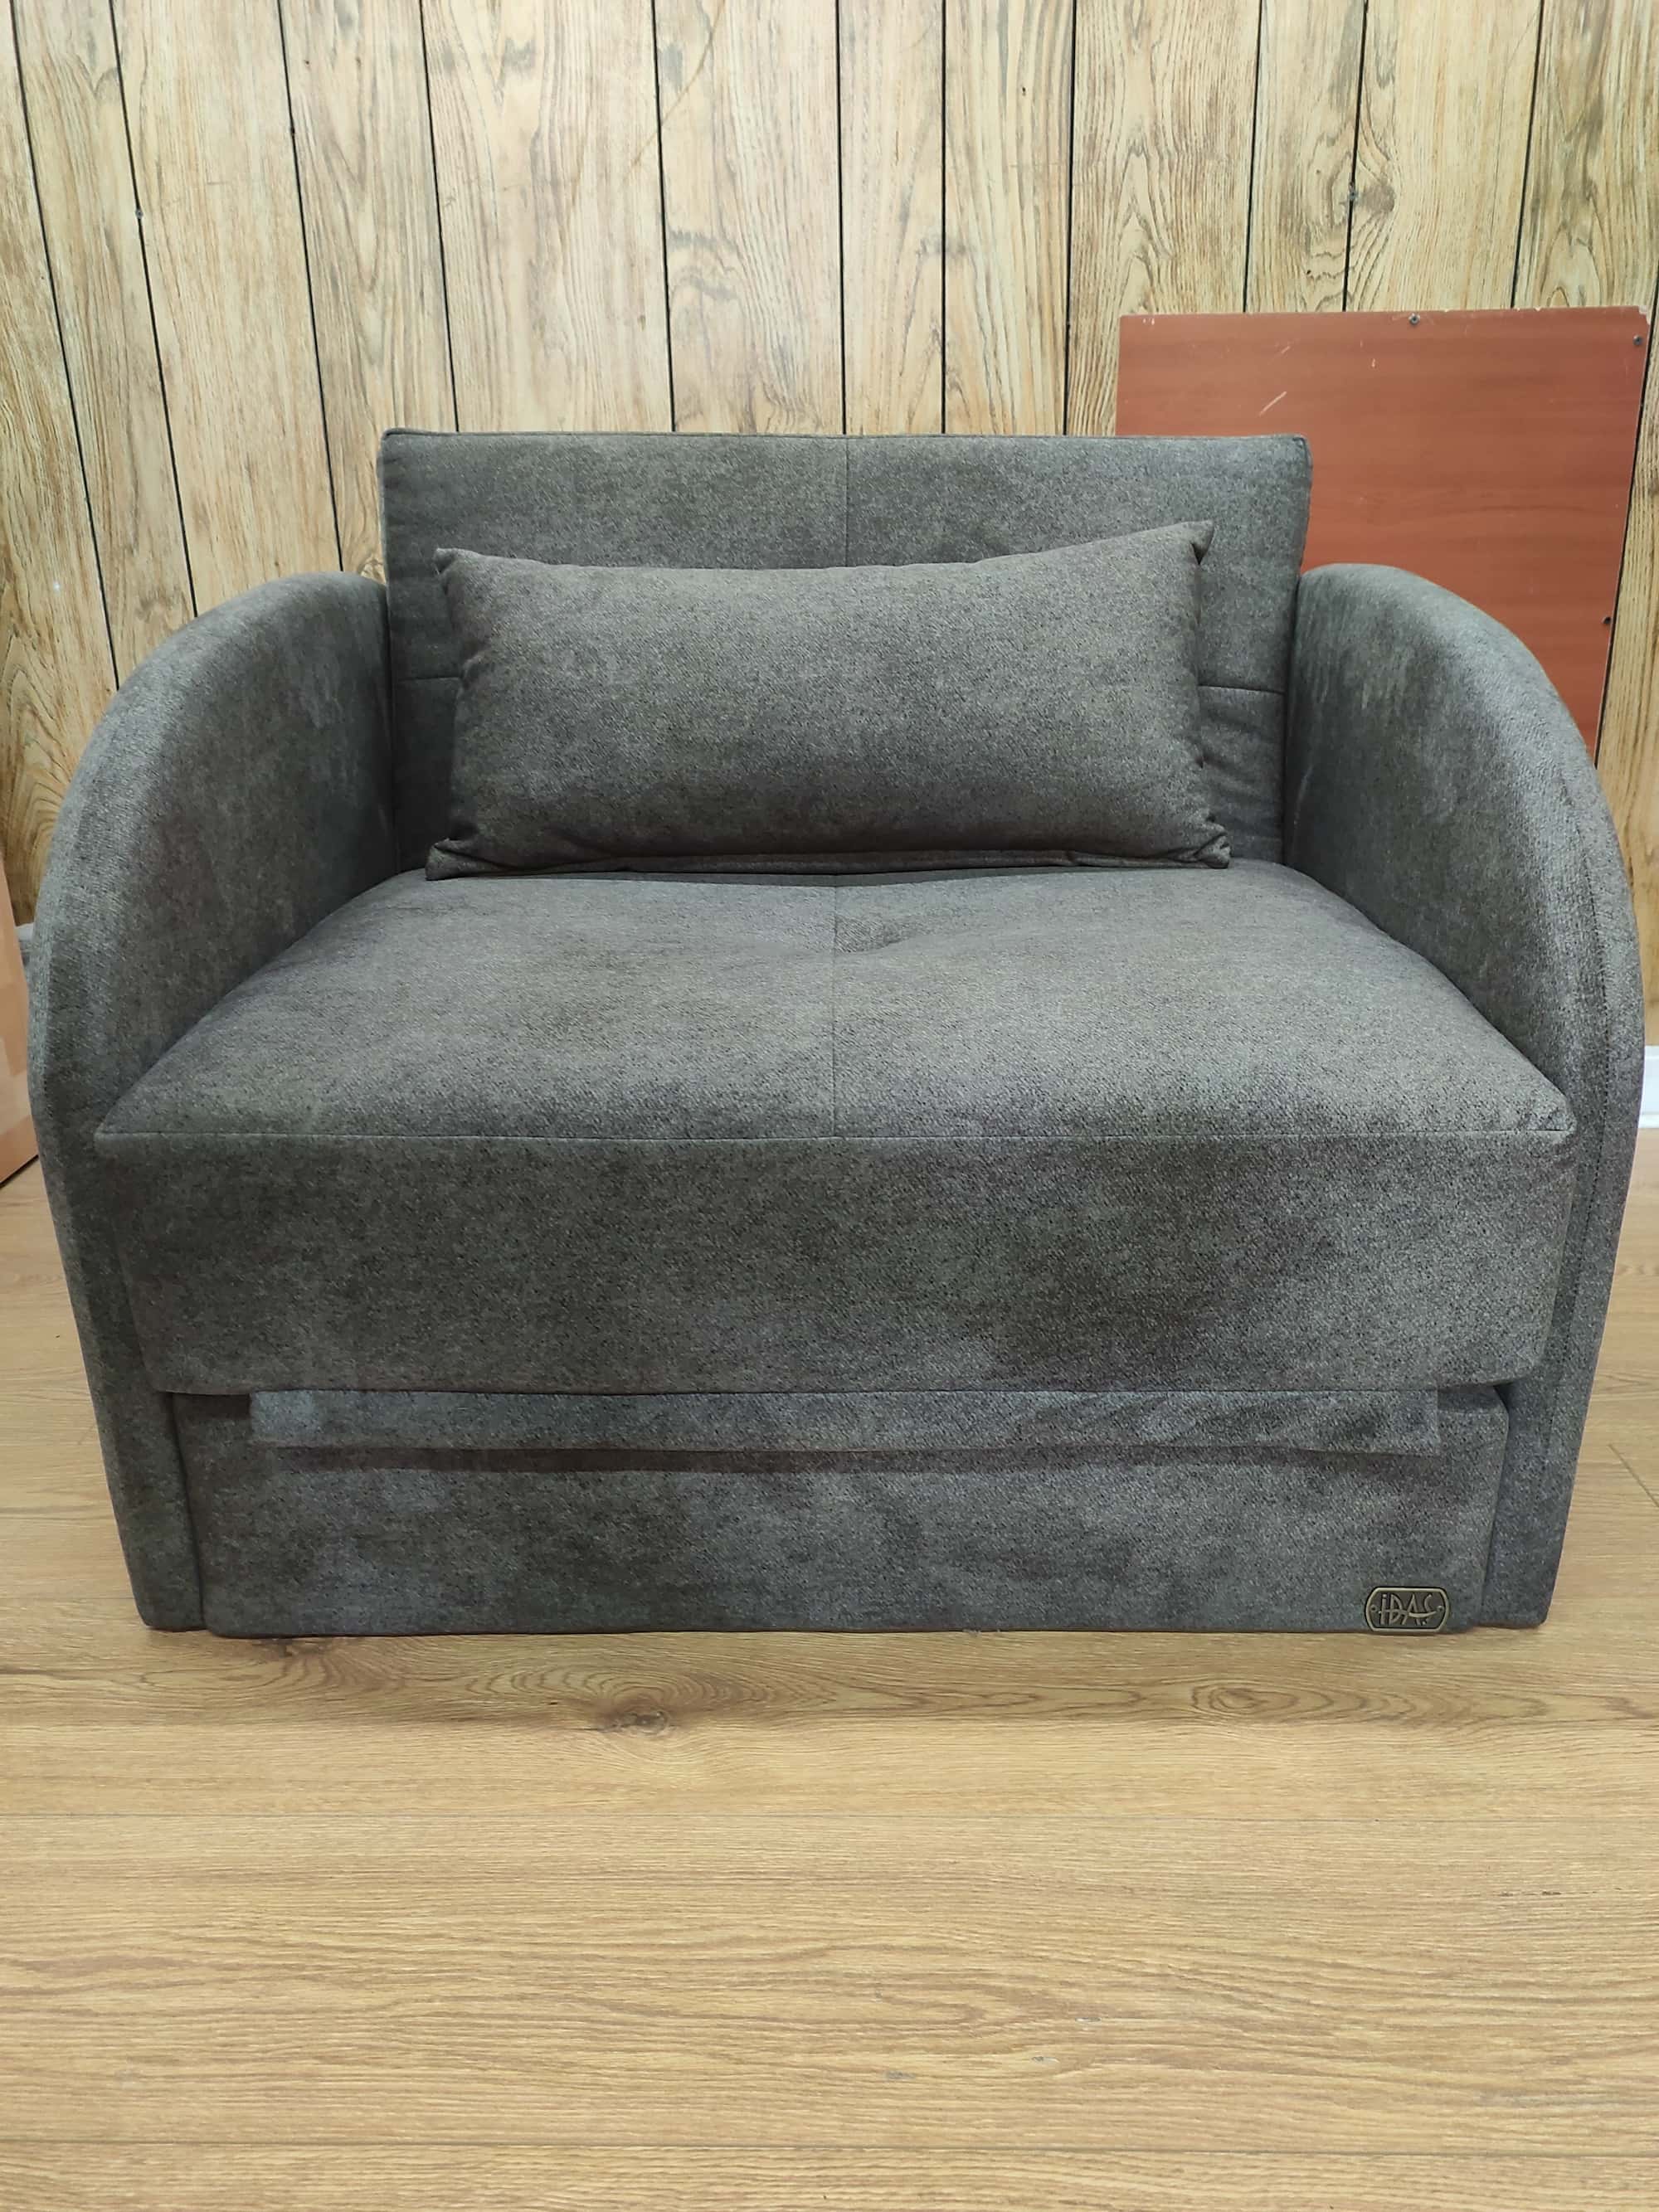 Easy Flip Deluxe Chair Bed Brown Fabric